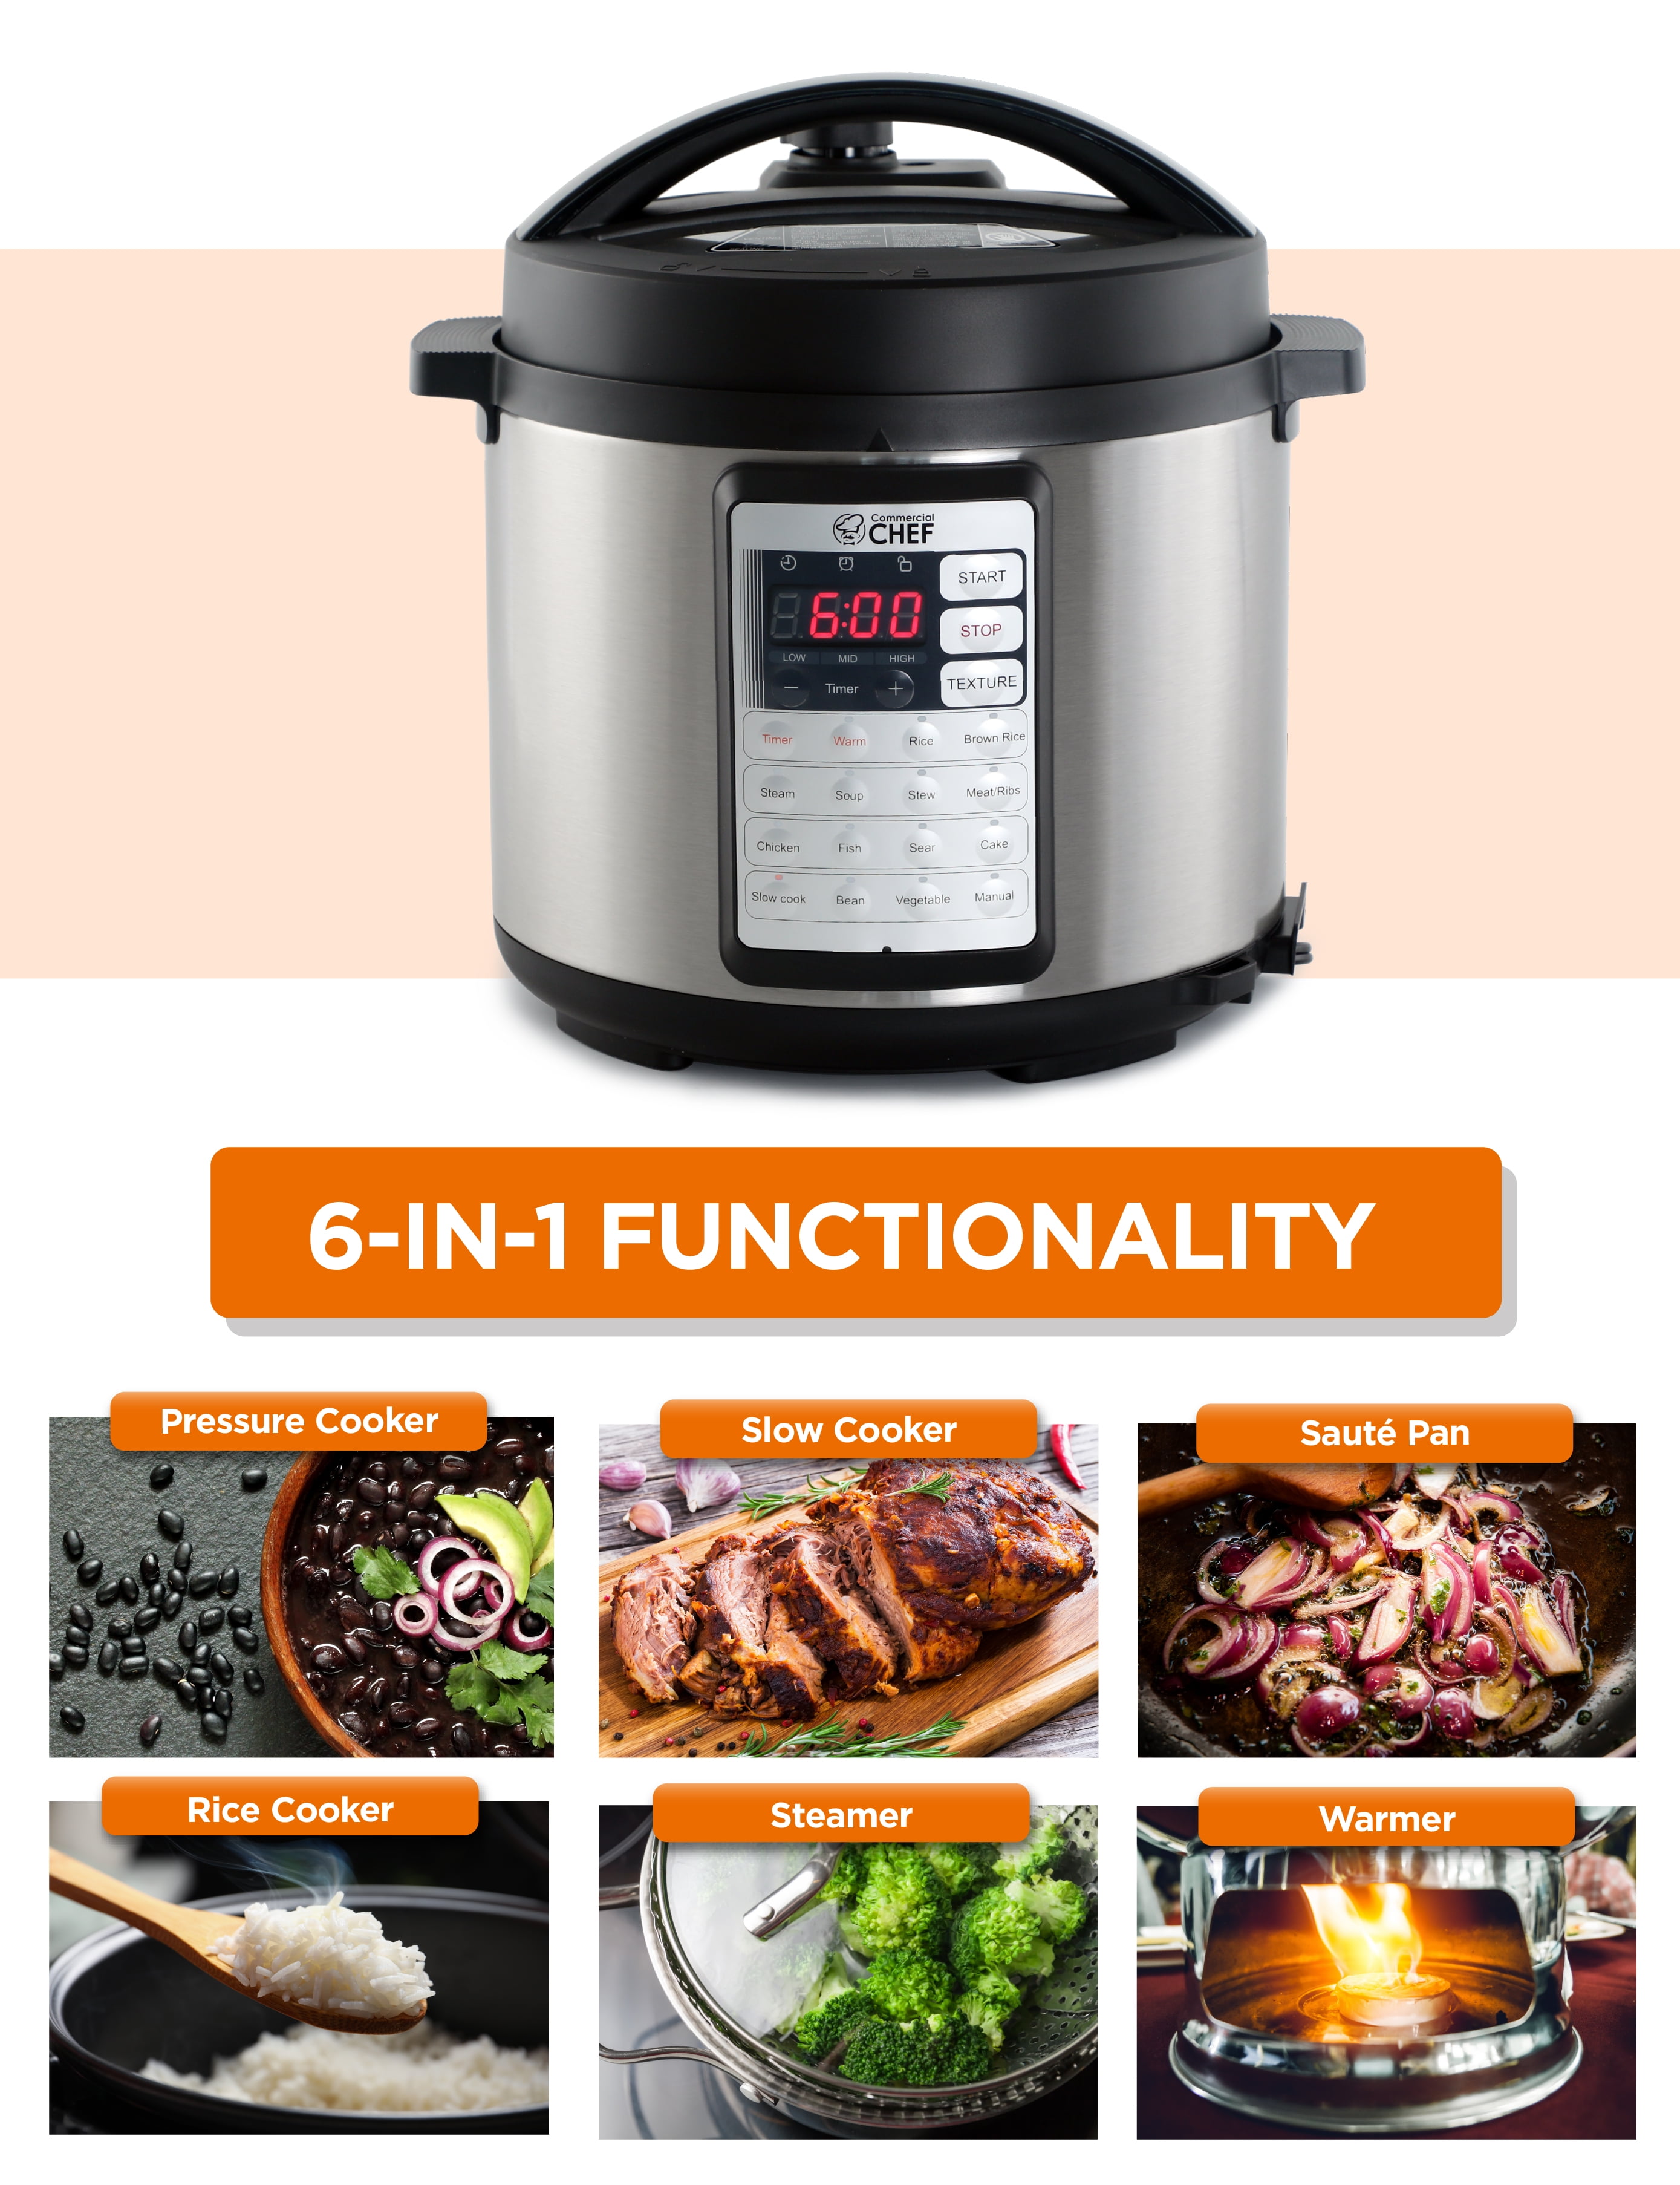 Commercial Chef 6.3-Quart 13-in-1 Electric Pressure Cooker, Stainless Steel  